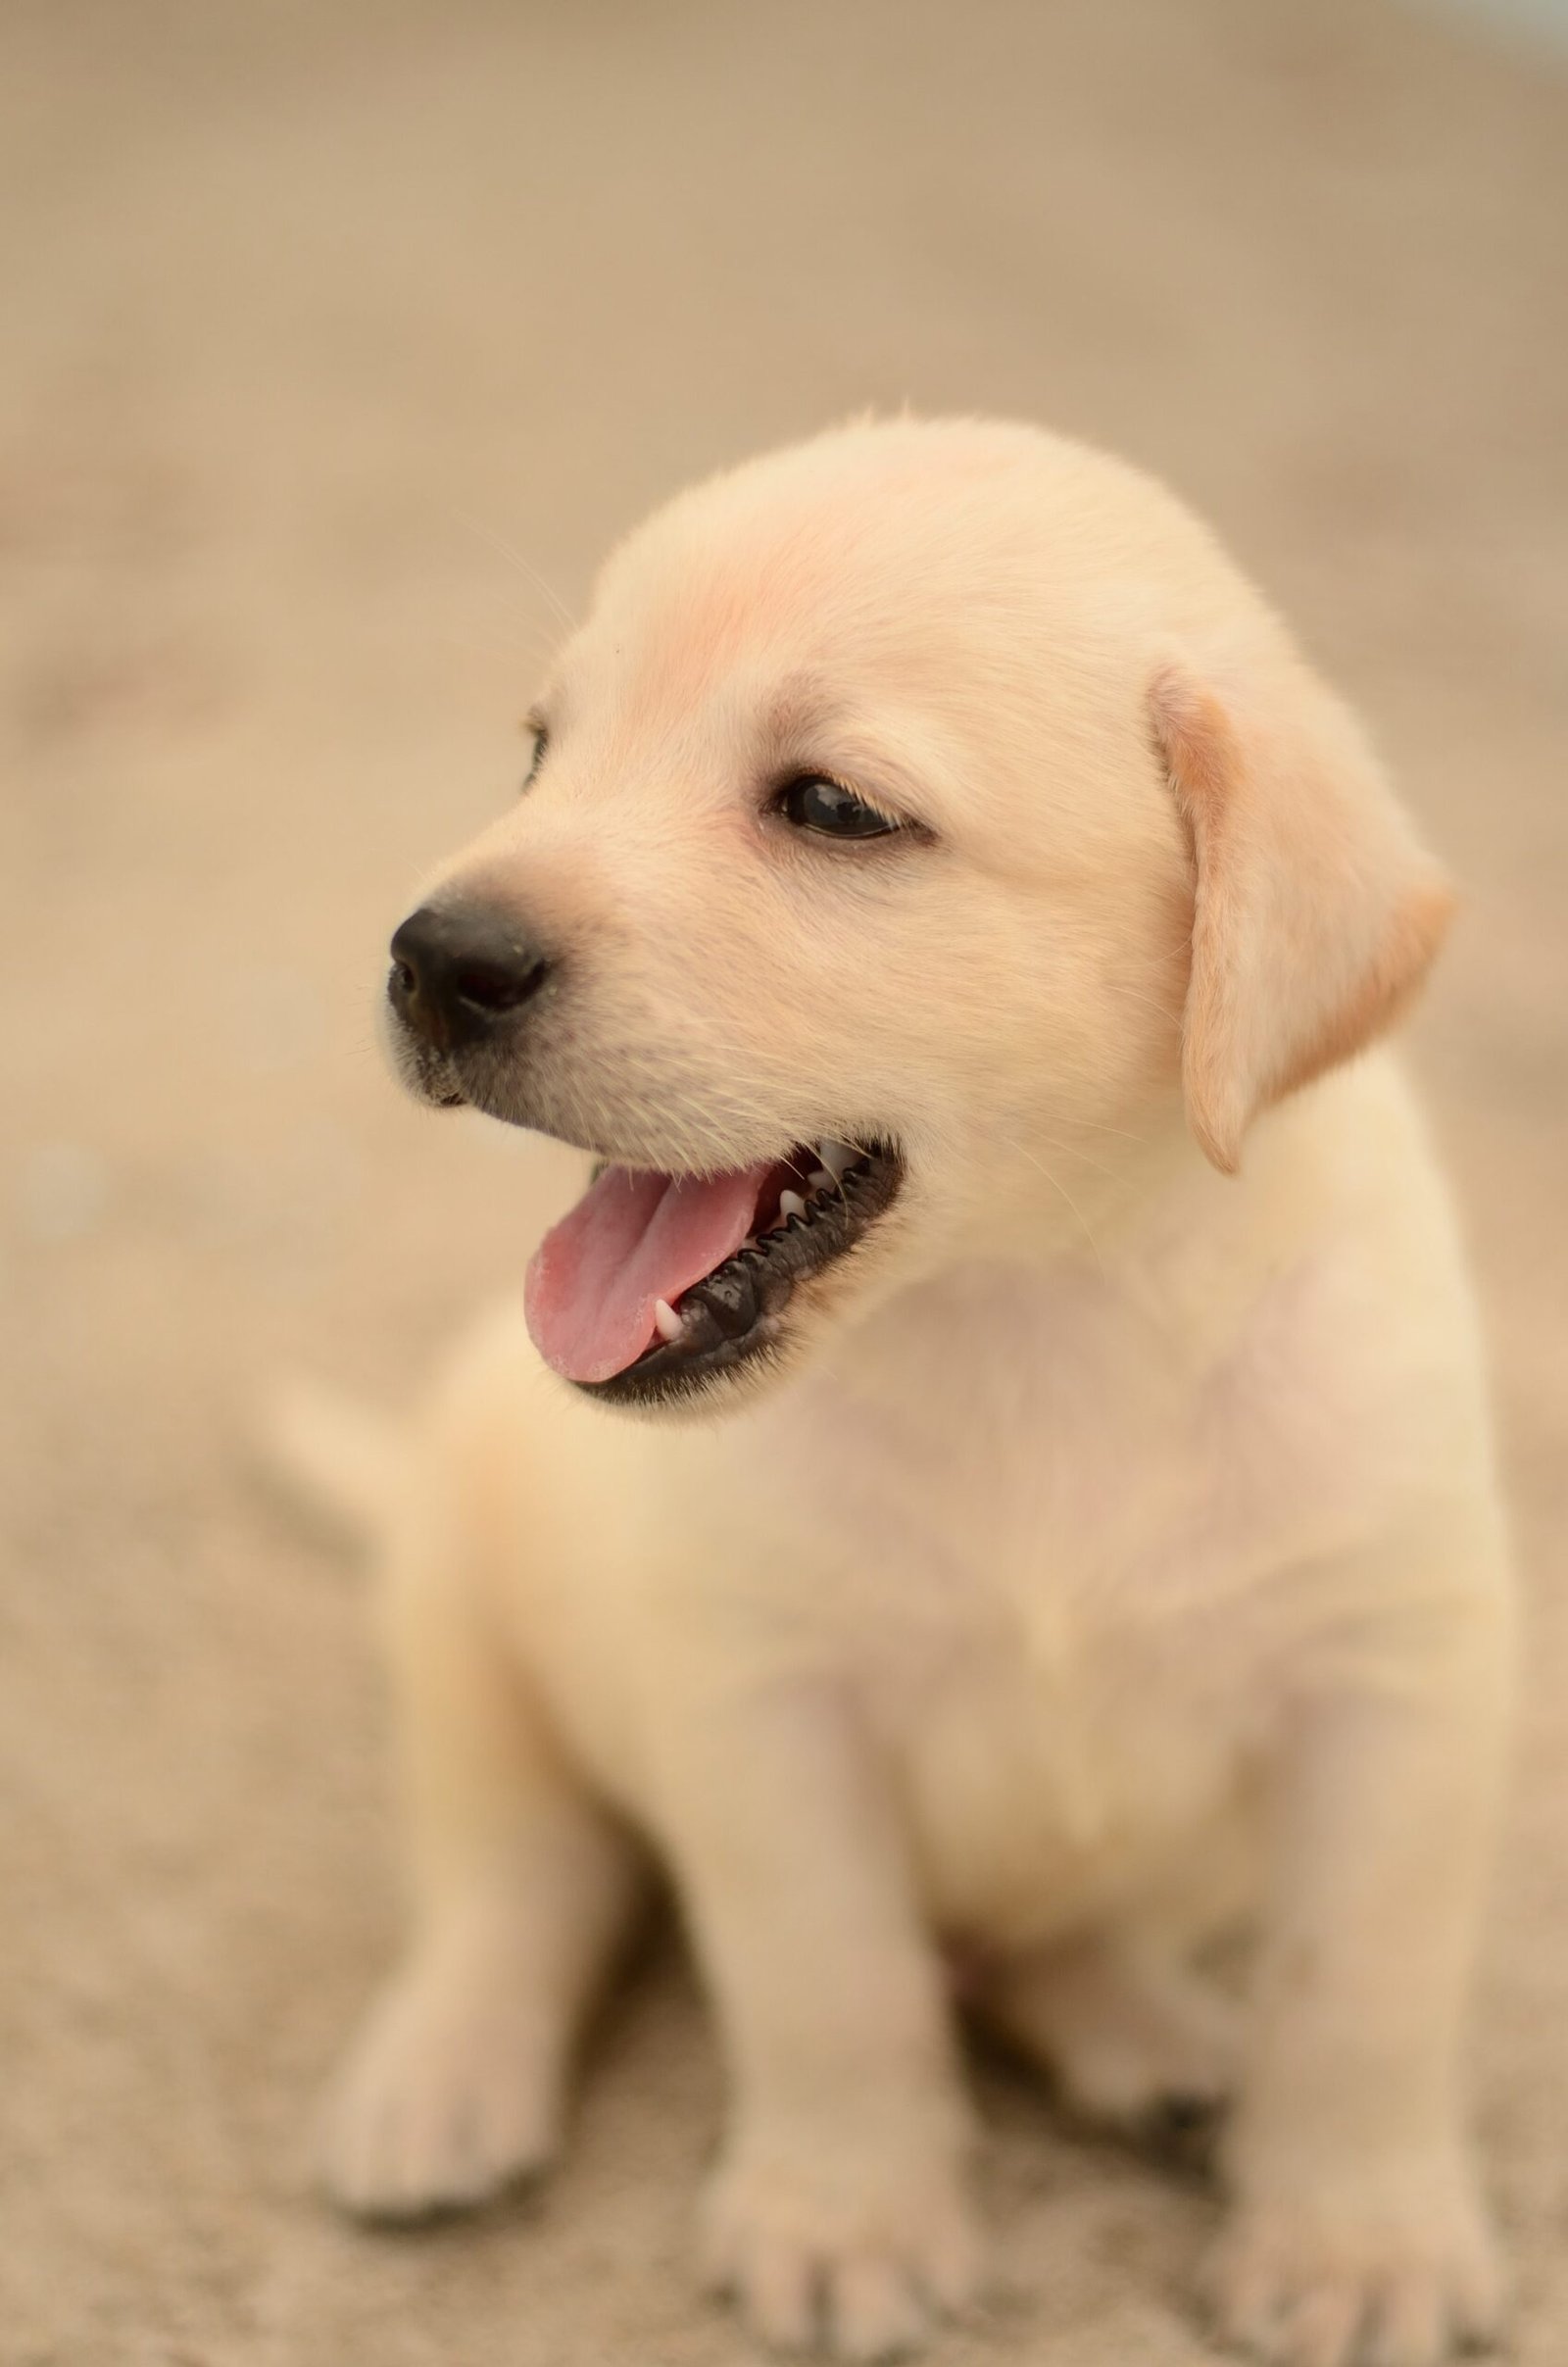 Puppy Training for Fear of Vets: Making Visits Less Scary